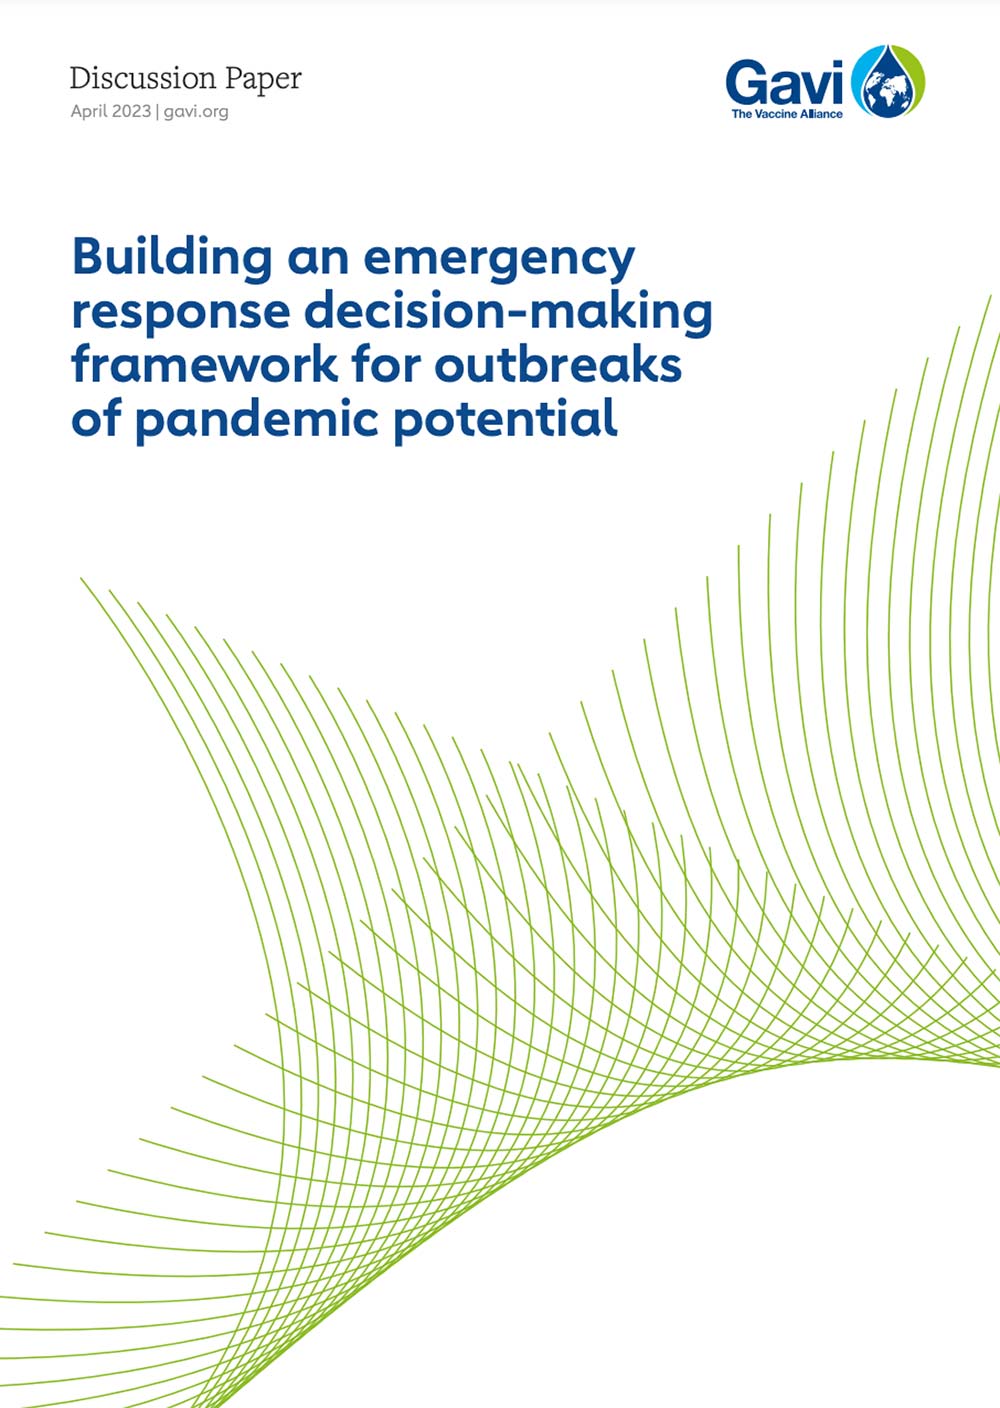 Building an emergency response decision-making framework for outbreaks of pandemic potential